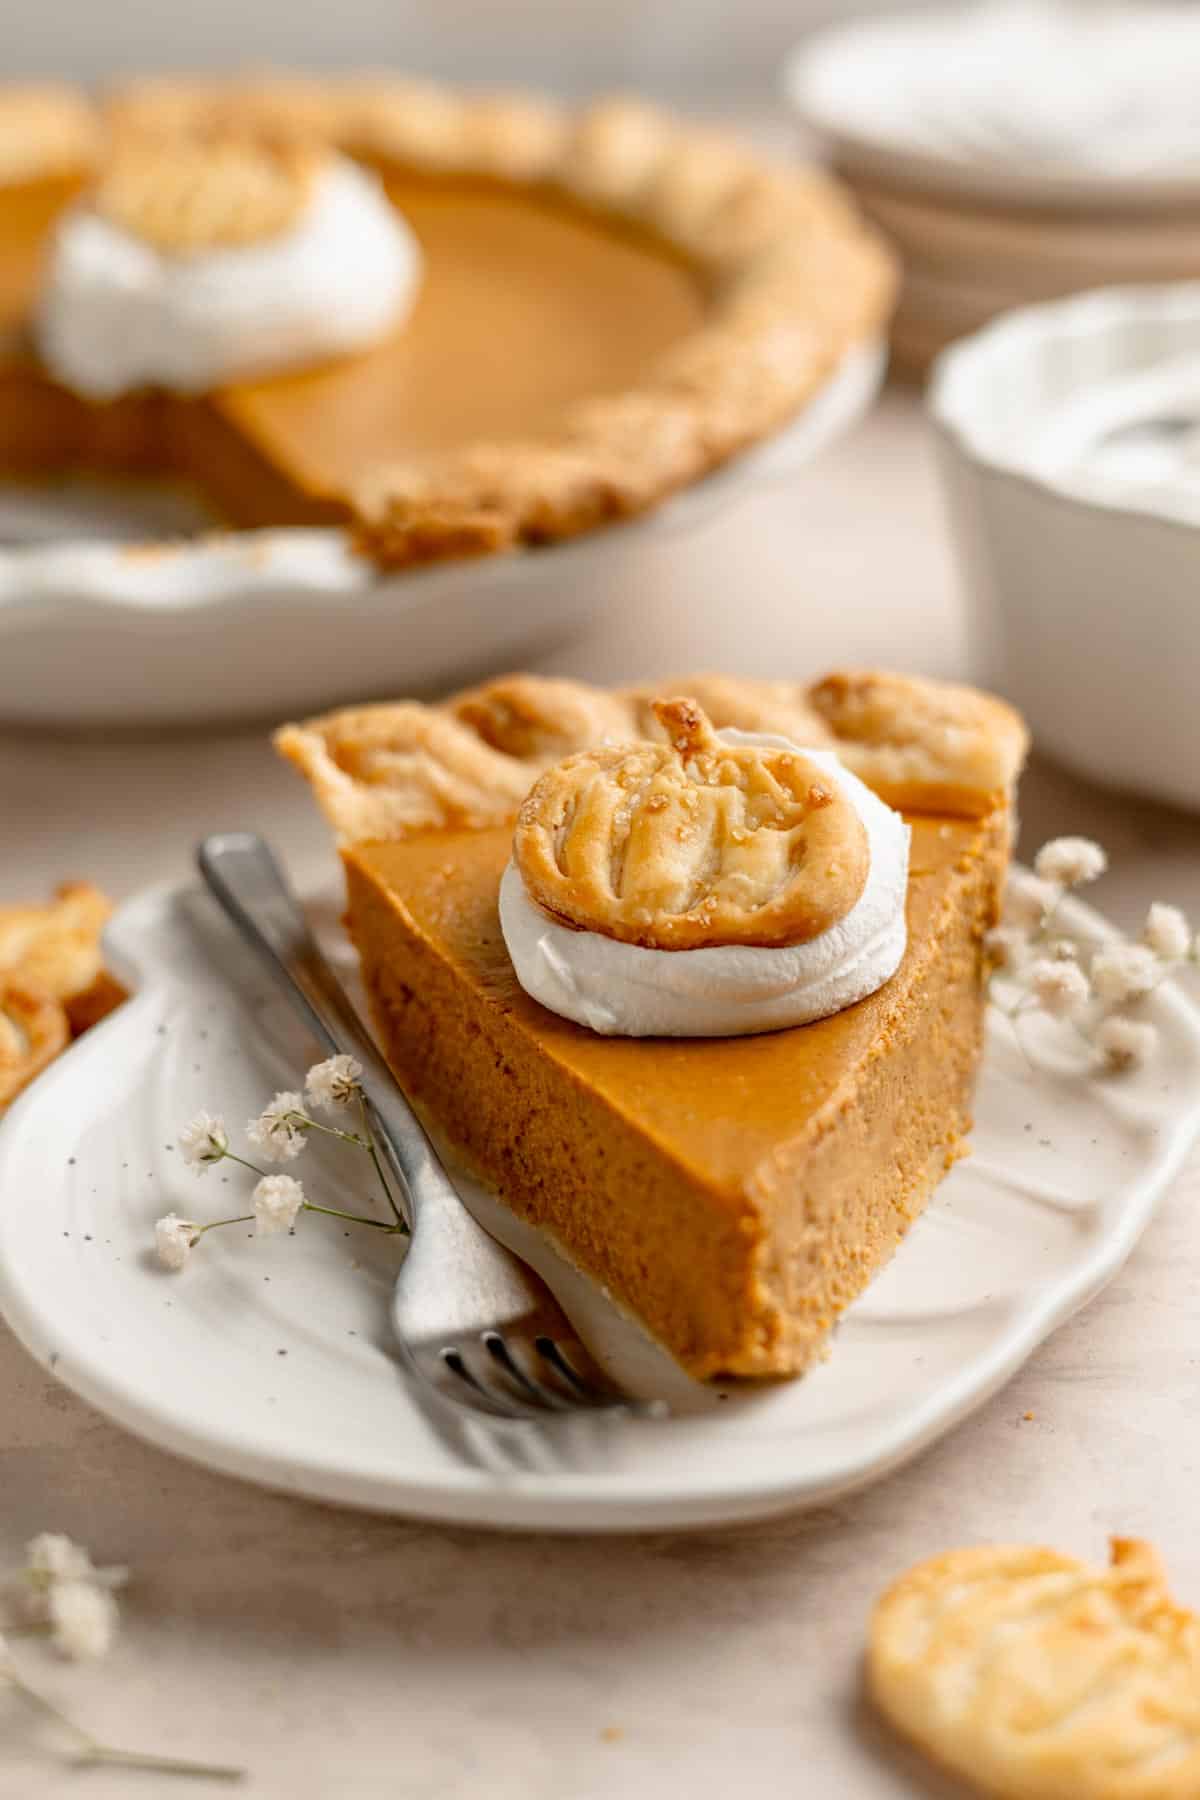 A perfect slice of gluten-free pumpkin pie garnished with whipped cream and a pumpkin-shaped crust cutout.